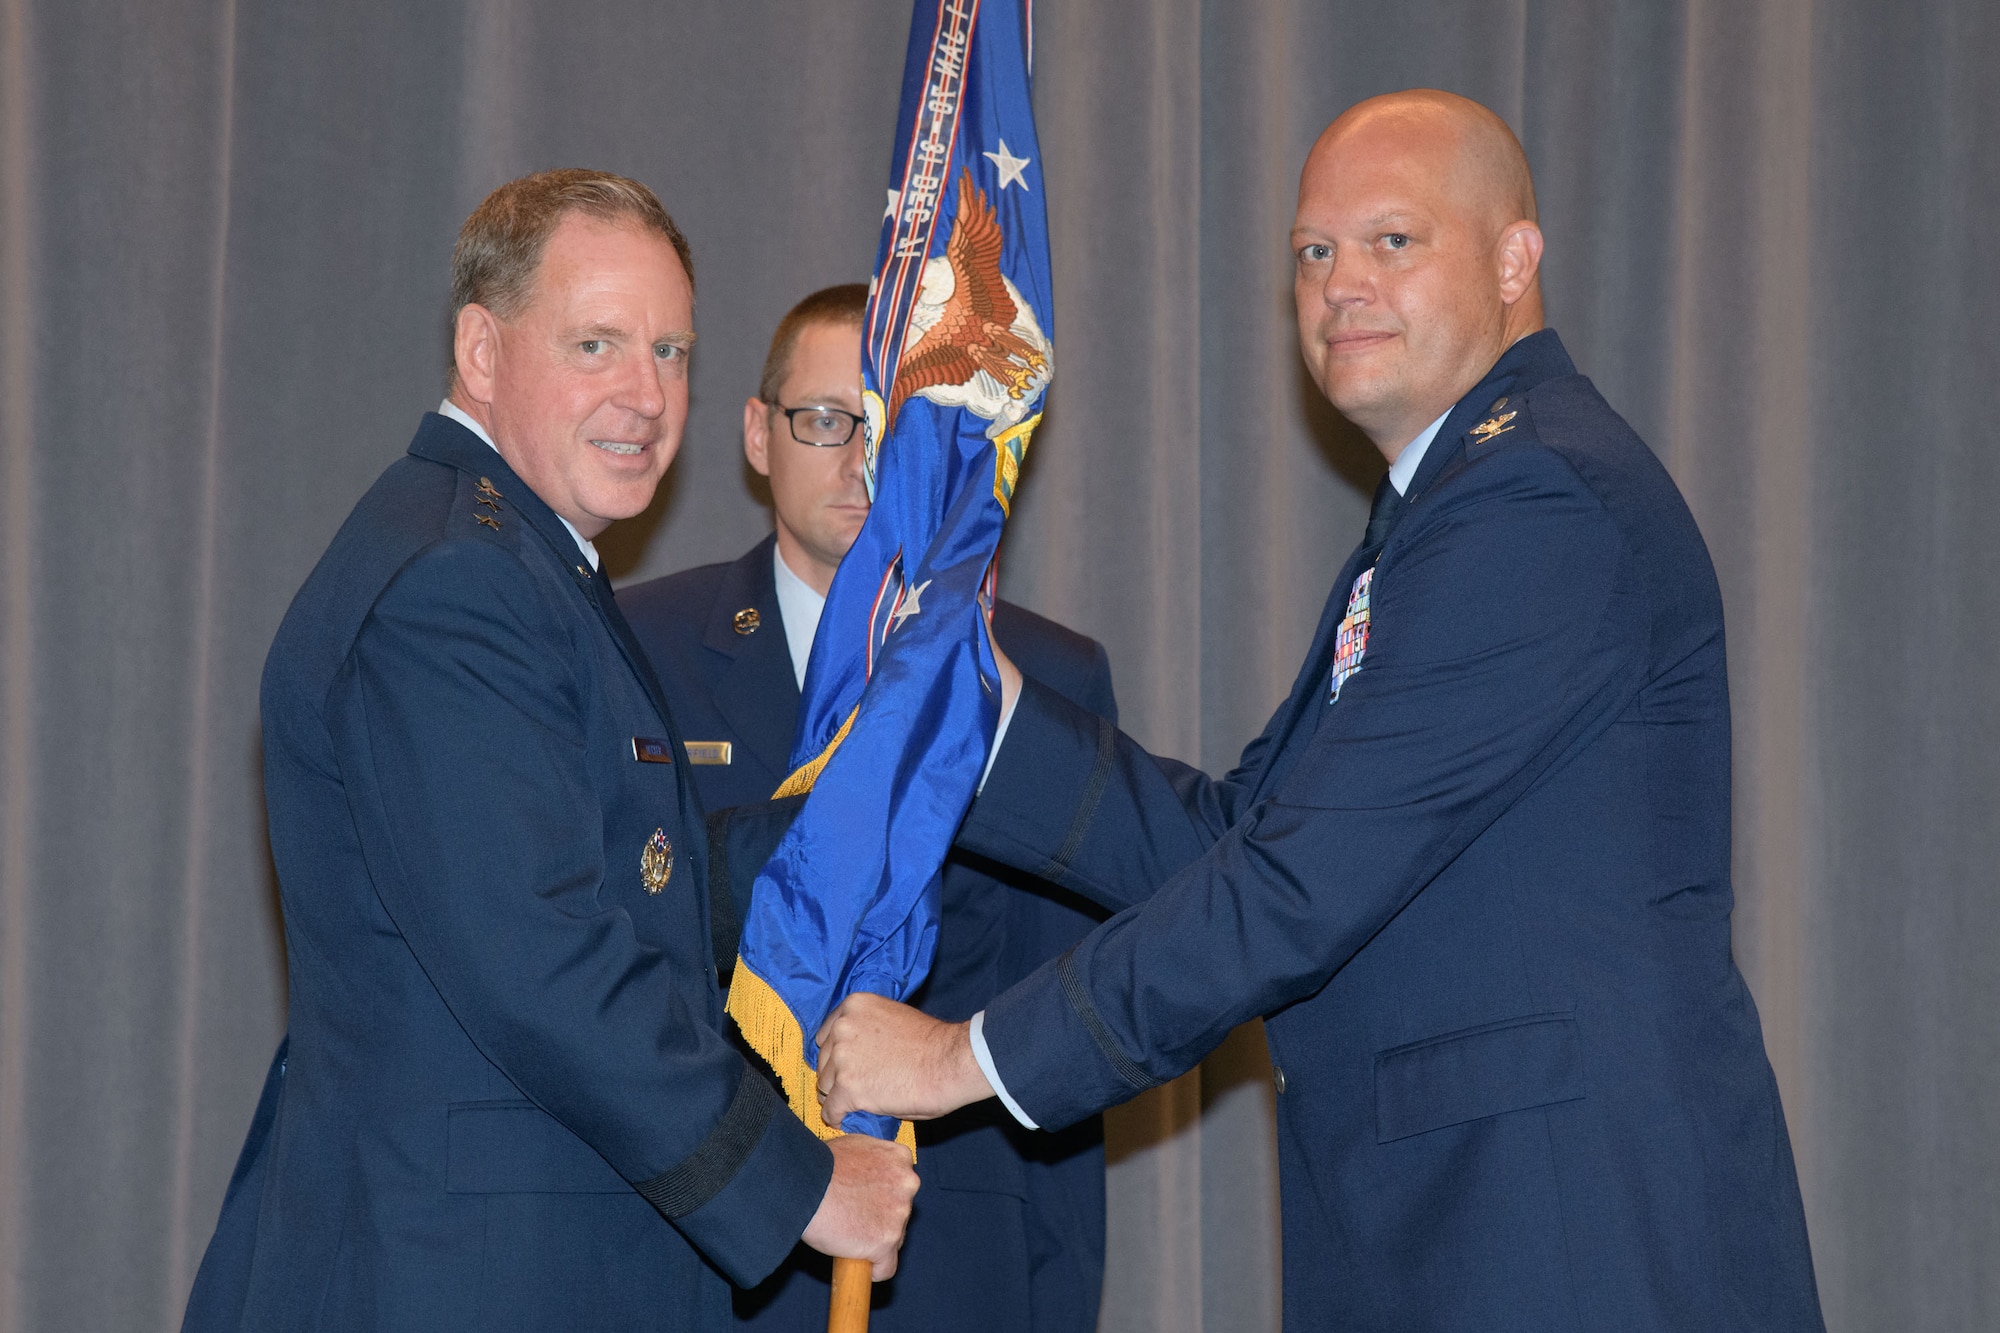 Col. Matthew Berry (right) took command of Air Command and Staff College during the school’s change of command ceremony June 21, 2022, Maxwell Air Force Base, Alabama. Lt. Gen. James Hecker (left), Air University commander and president, presided over the ceremony. Berry’s previous assignment was as vice commander, Special Warfare Training Wing, Joint Base San Antonio, Texas. (U.S. Air Force photo by Trey Ward)